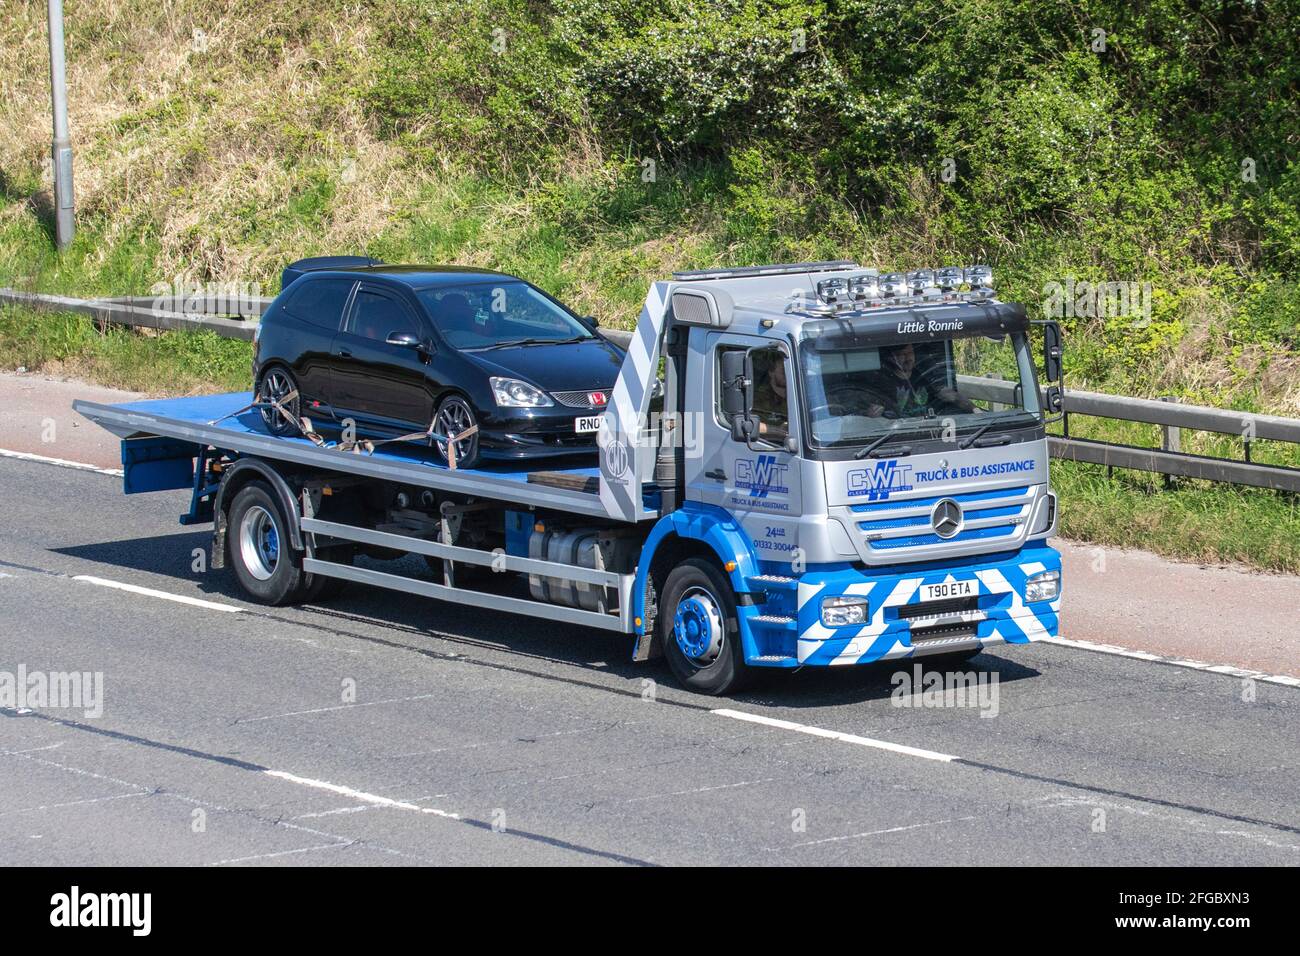 'Little Ronnie' CWT 24hr Truck & Bus 24hr roadside breakdown recovery assistance, Stock Photo